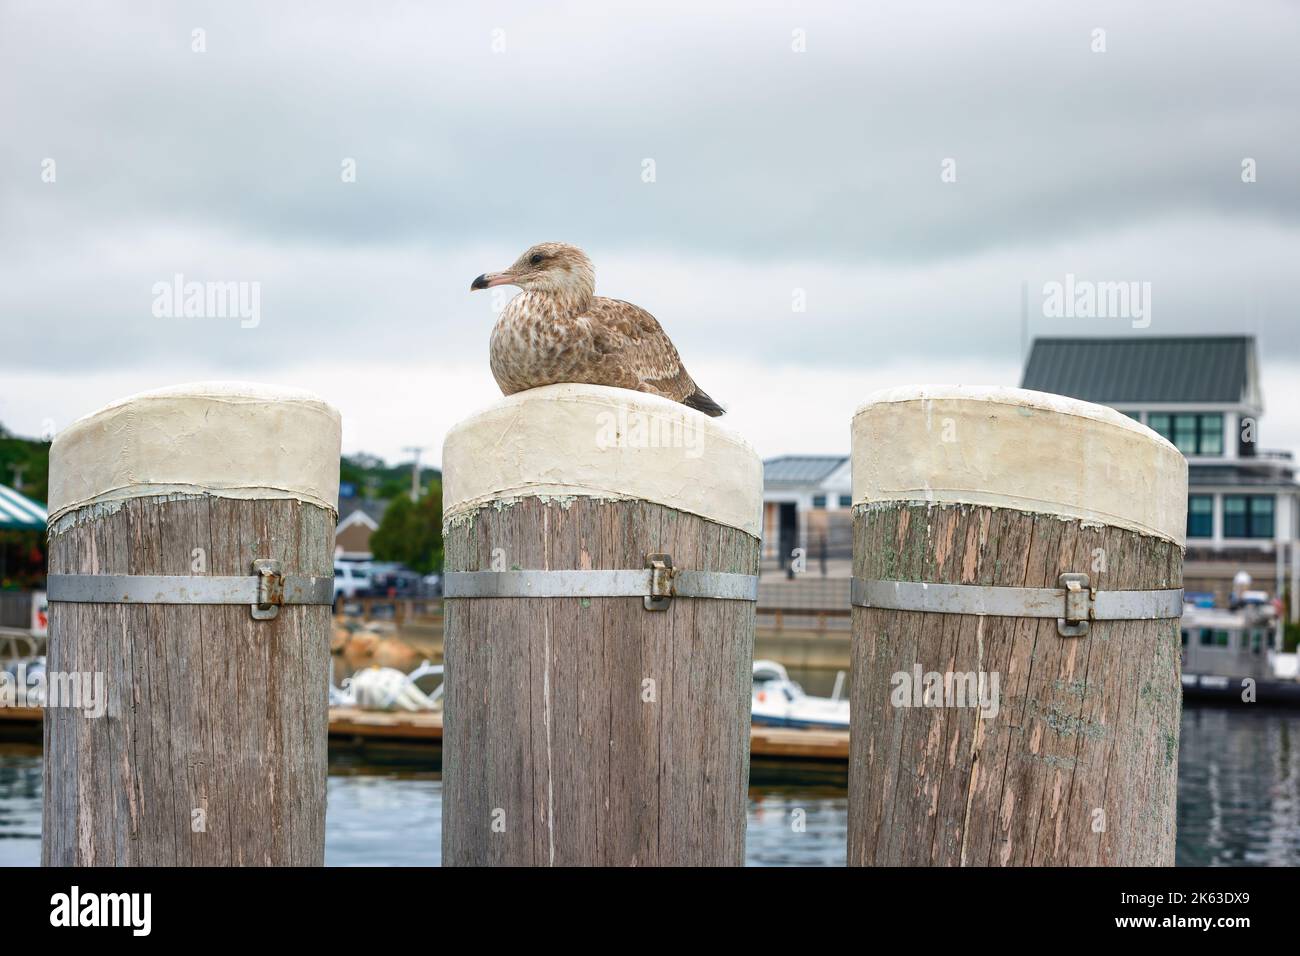 A juvenile seagul sits on the middle of three peir posts at Plymouth Harbor. Stock Photo